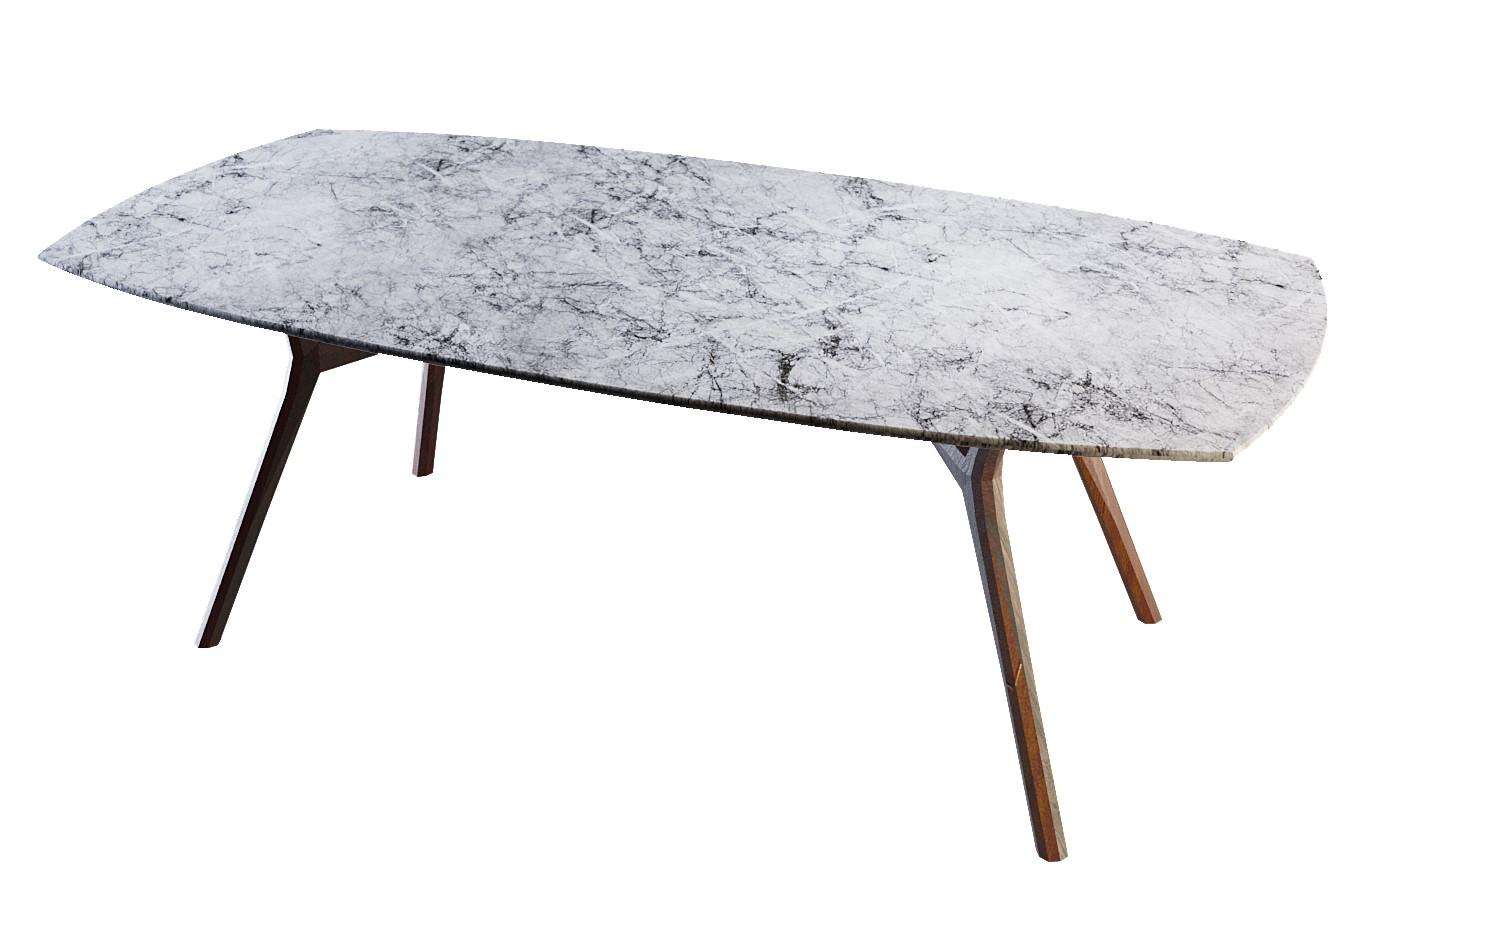 Hand-Crafted NORDST POUL Dining Table, Italian White Montain Marble, Danish Modern Design For Sale